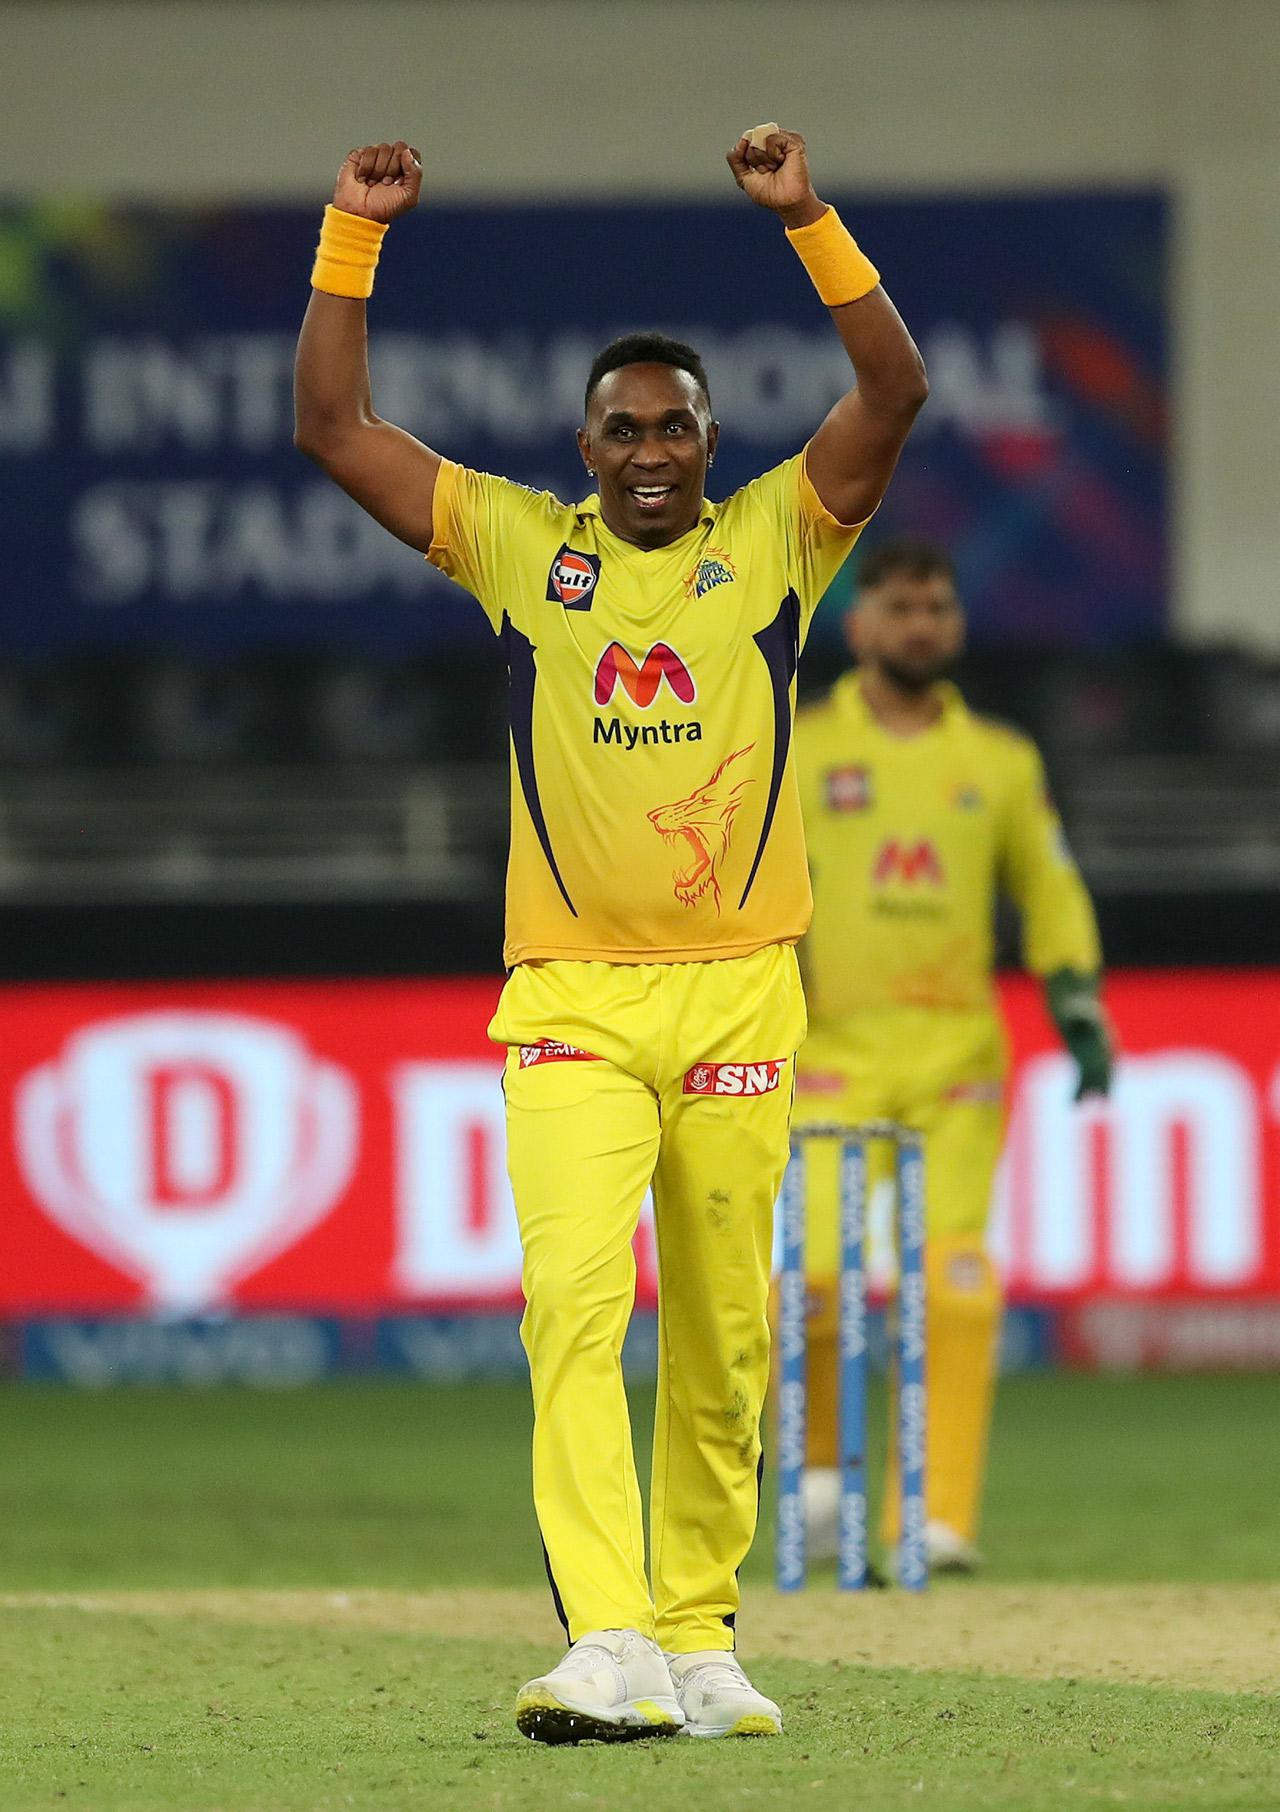 CSK's Dwayne Bravo celebrates the wicket of Shivam Mavi of Kolkata Knight Riders. Bravo, a senior player in CSK's outfit, took 1-29 in 4 overs. After winning the IPL 2021 title, Bravo now has the most T20 titles in history with 16 to his name